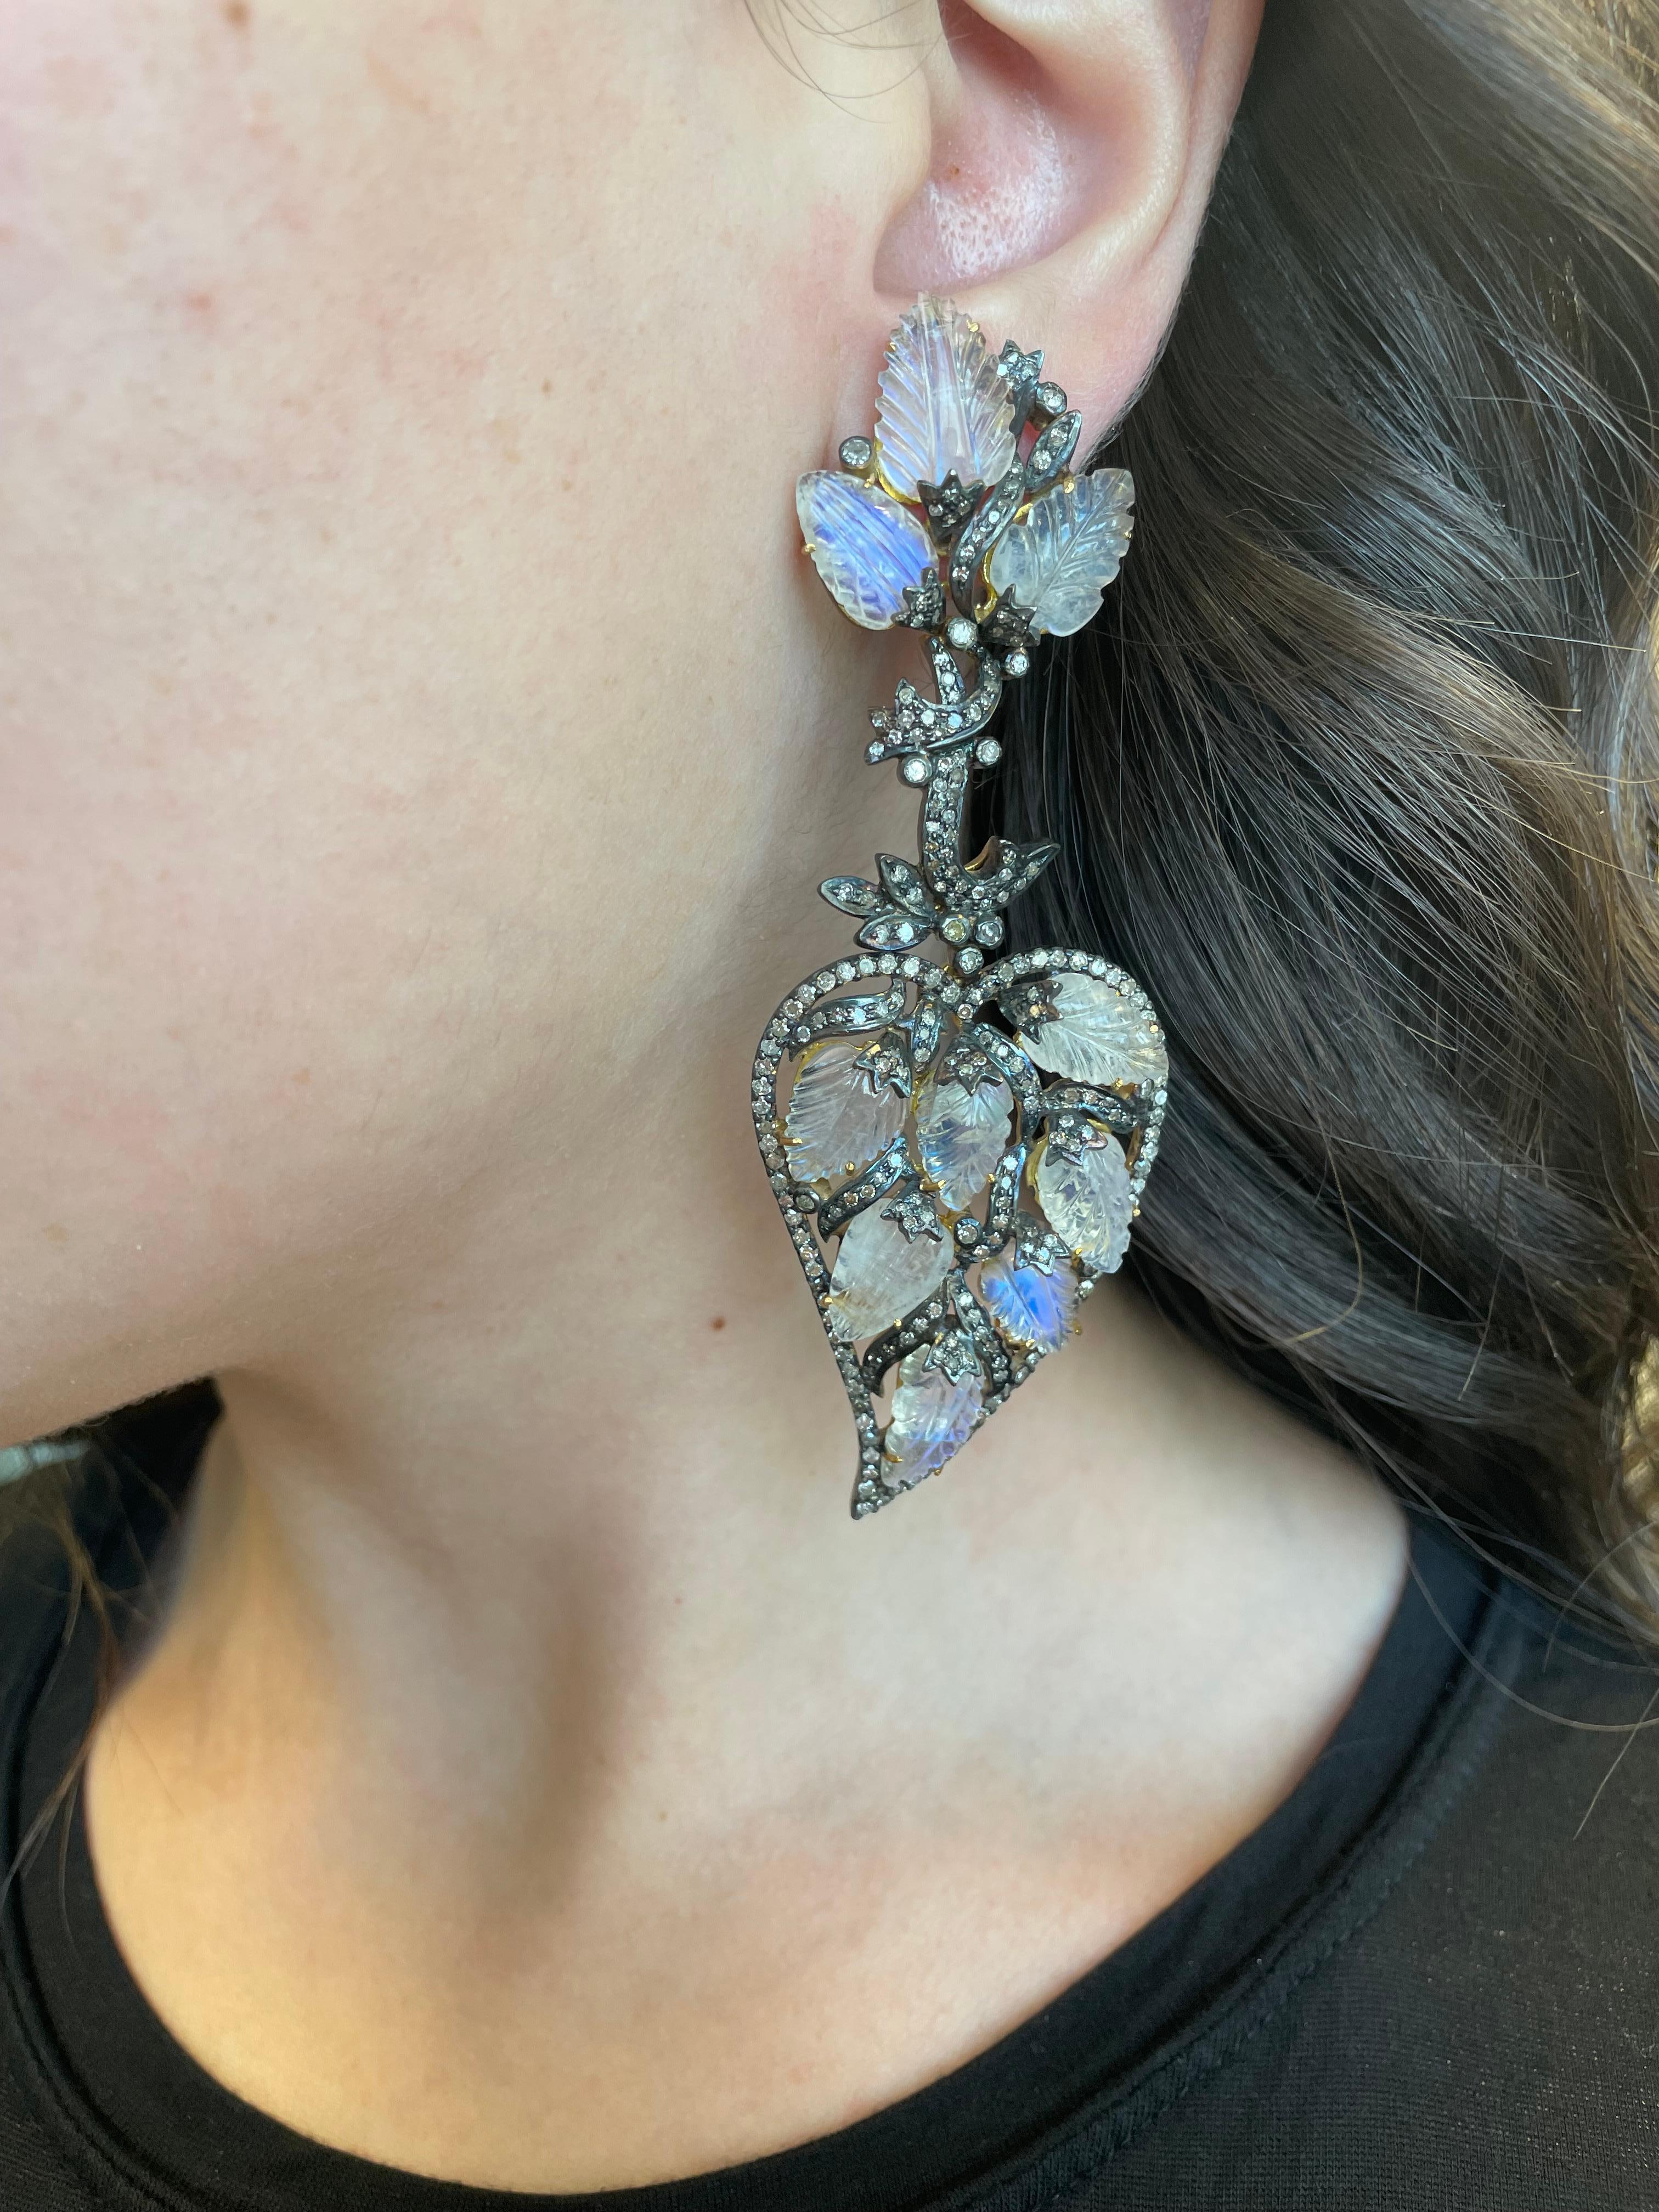 Statement Victorian inspired chandelier earrings.
Approximately 4.80 carats of round cut diamonds, L/M color, and SI clarity. Approximately 42 carats of carved moonstone. Silver and gold.
Accommodated with an up to date appraisal by a GIA G.G. upon